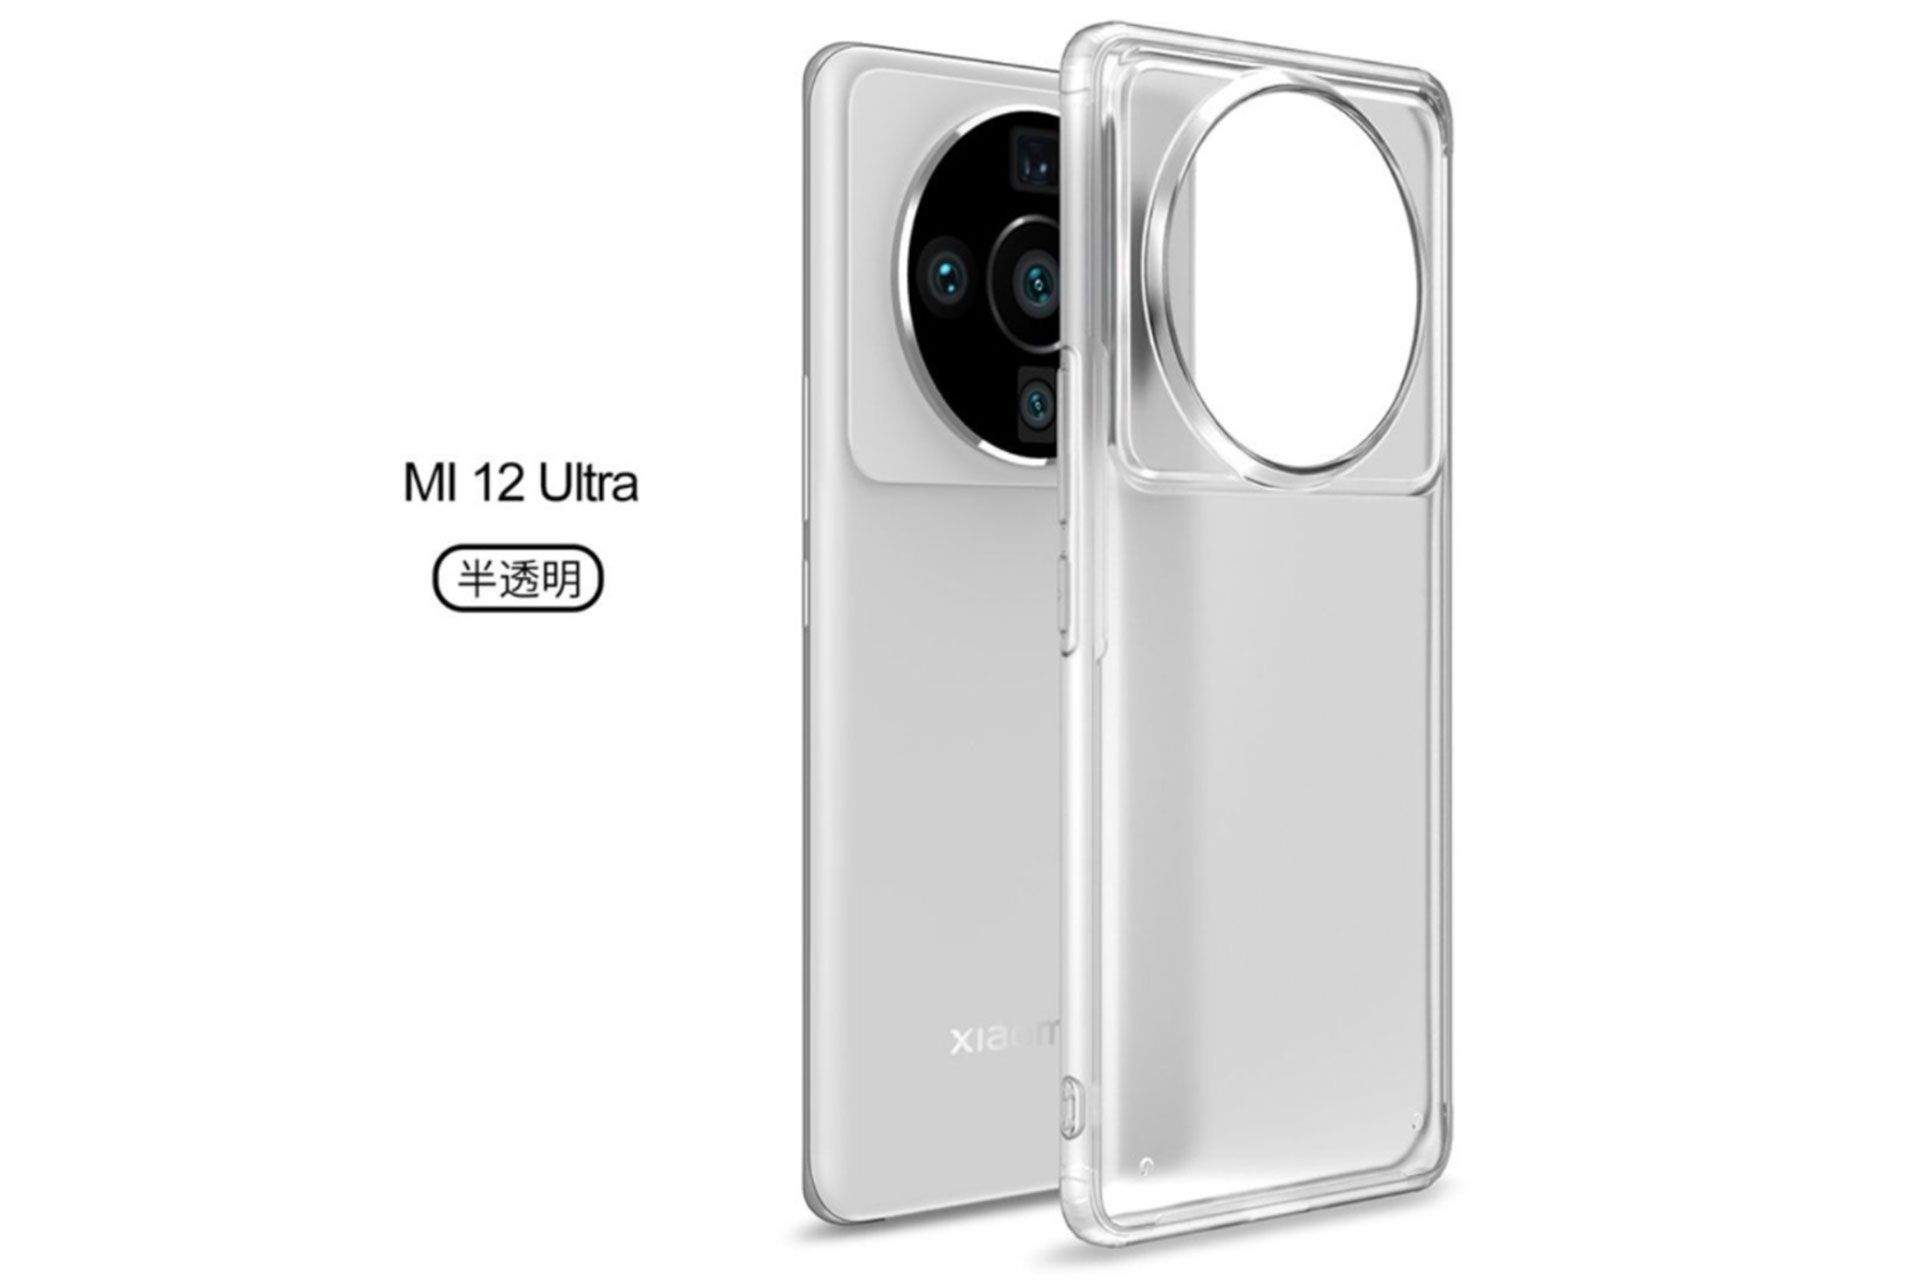 Back panel and transparent cover of Xiaomi 12 Ultra smartphone in white color